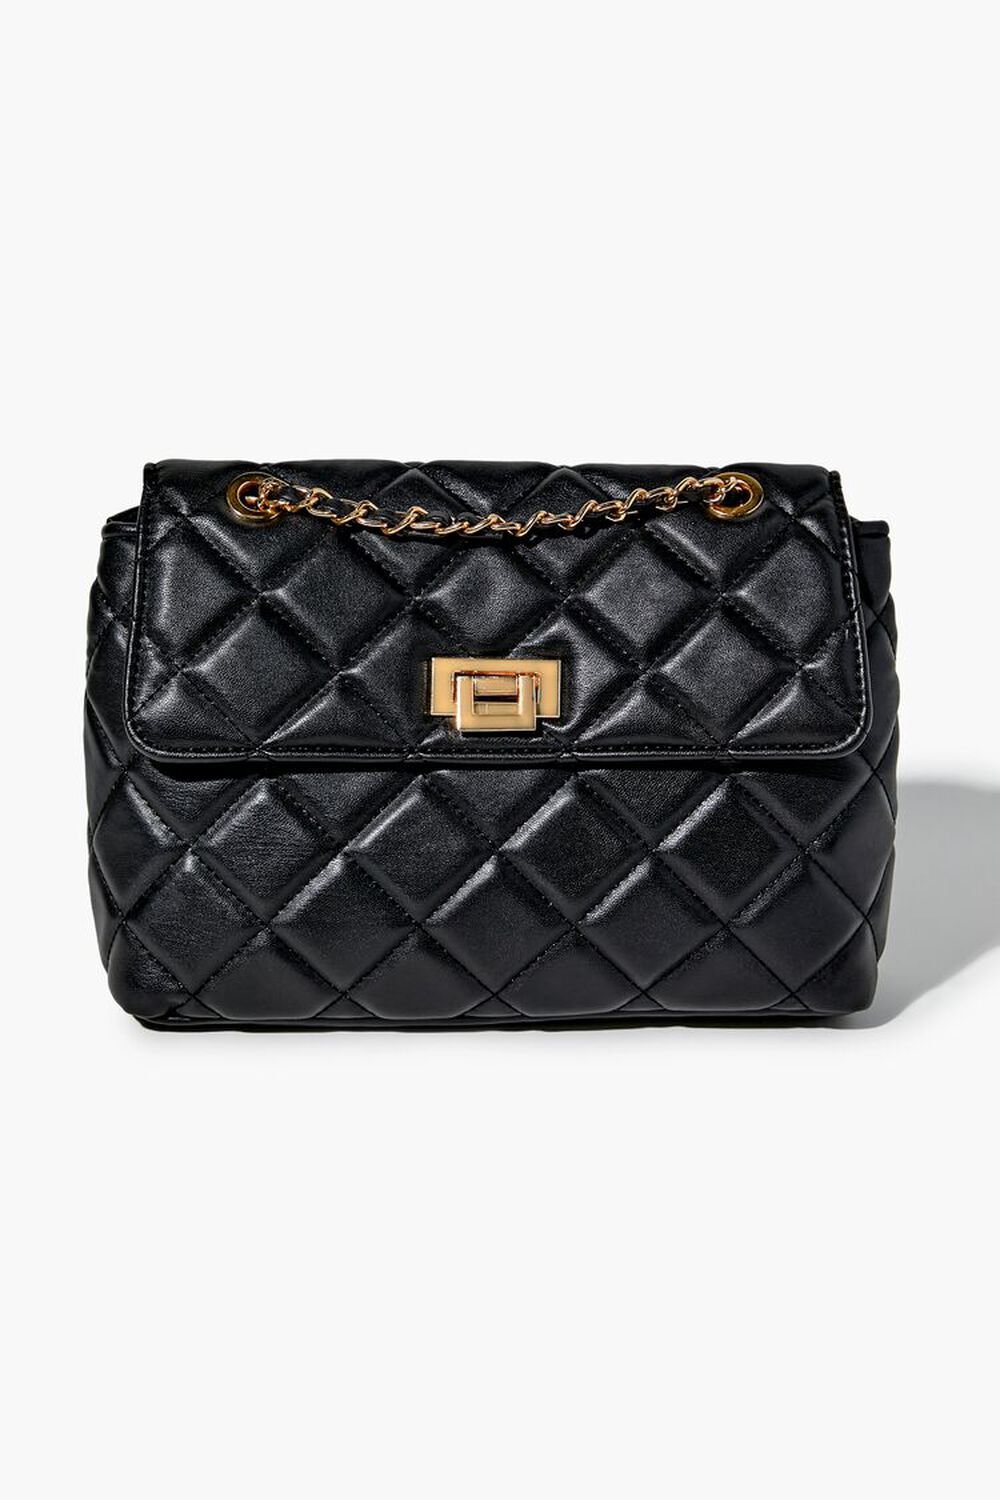 Haksim Women Black Quilted Purse Lattice Clutch Small Crossbody Shoulder Bag with Chain Strap Leather